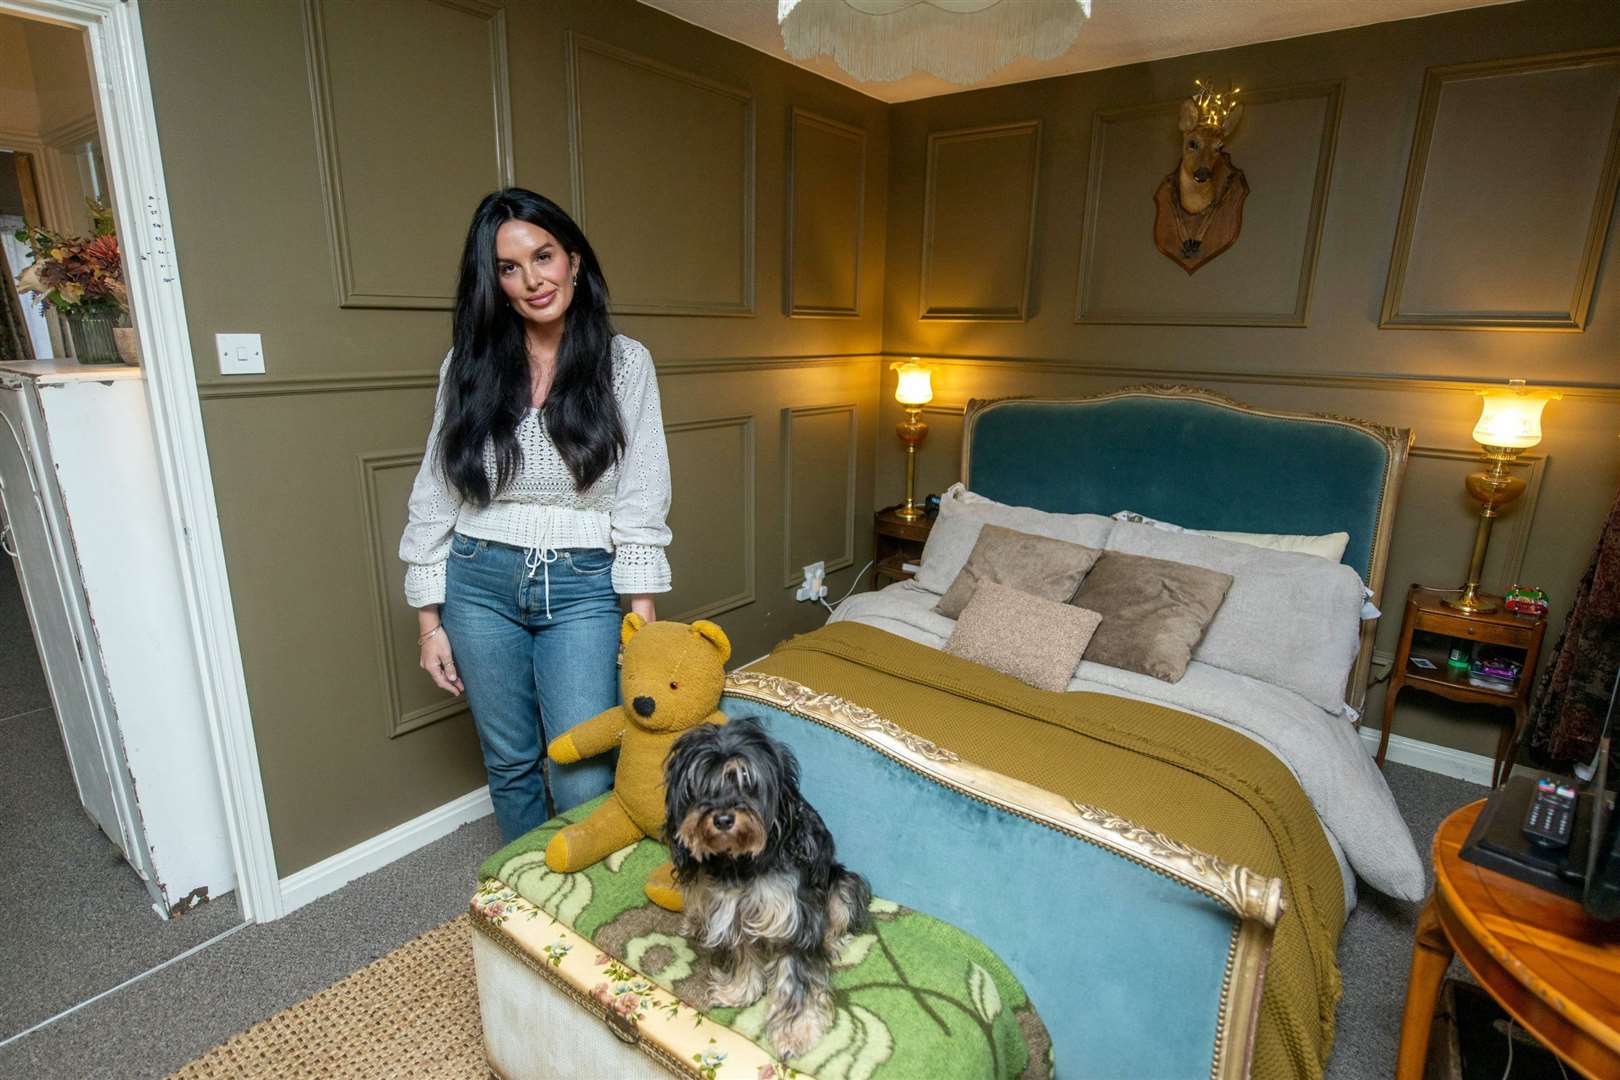 Josephina Finch from Herne Bay says she searched charity shops and car boot sales for floral wallpaper, trinkets and old furniture as she redecorated her Canterbury house. Picture: SWNS